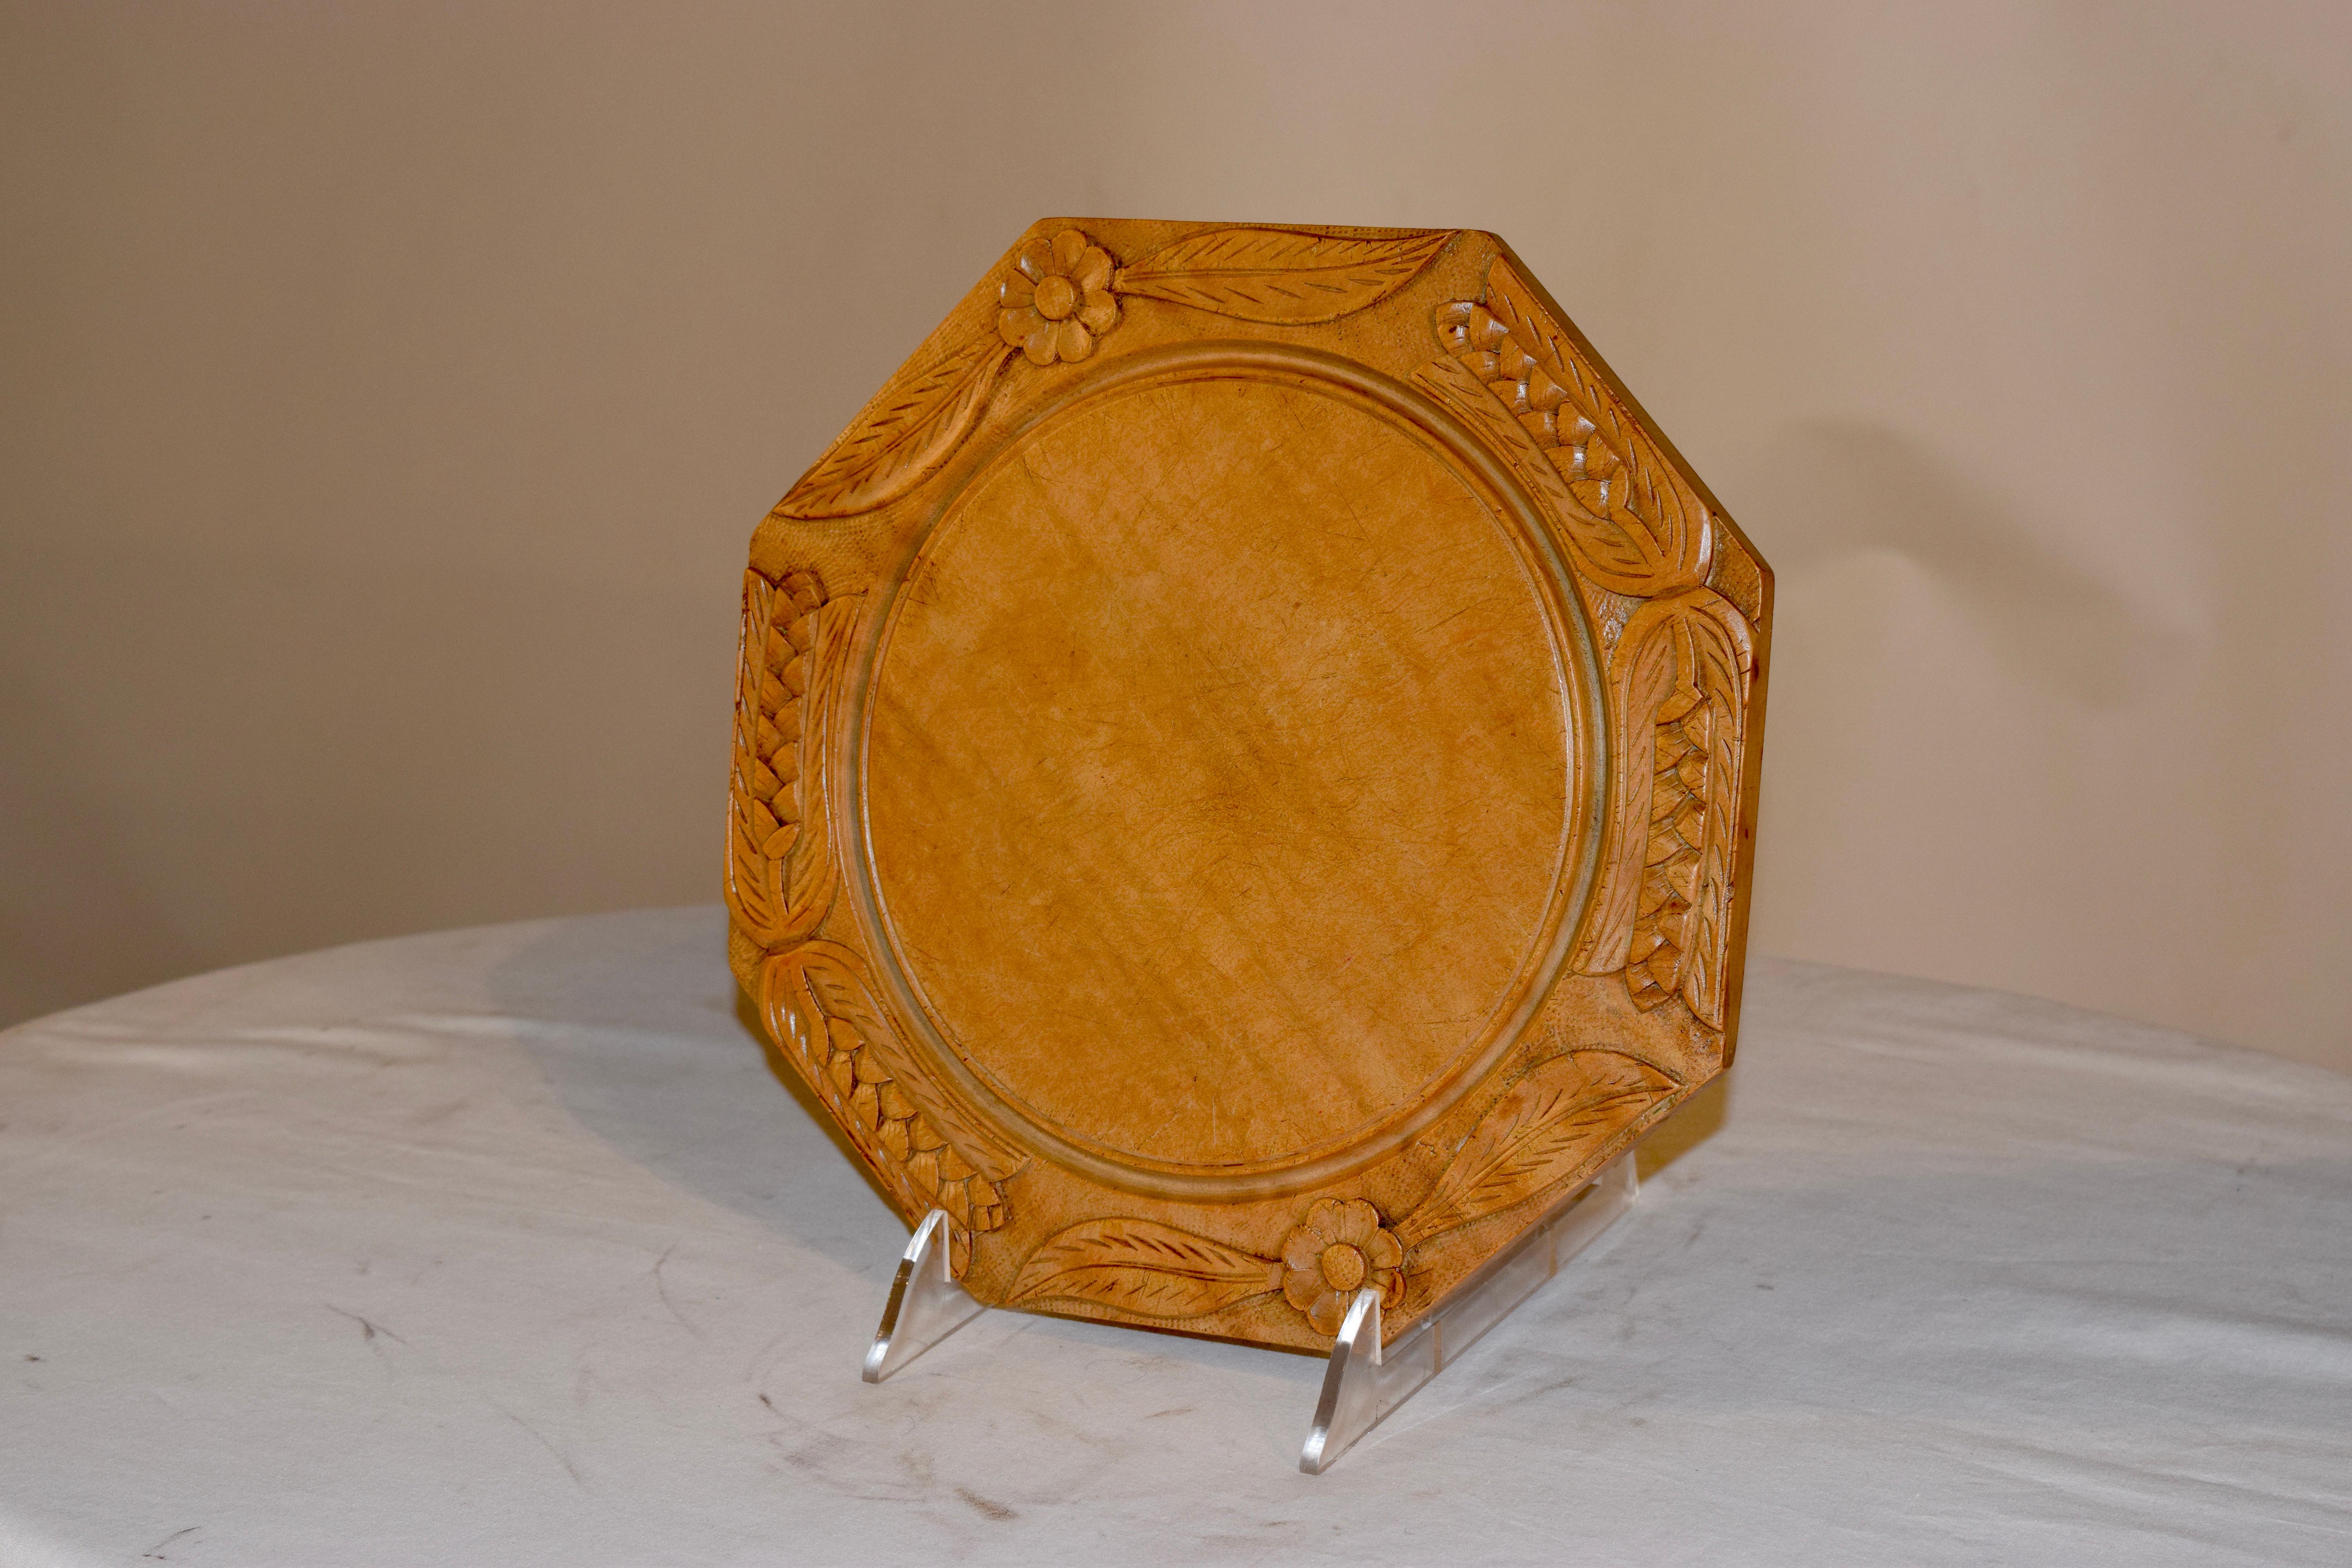 19th century octagonal shaped bread board from England. The border is wonderfully hand carved with decorations of florals and wheat, with a raised center for cutting.